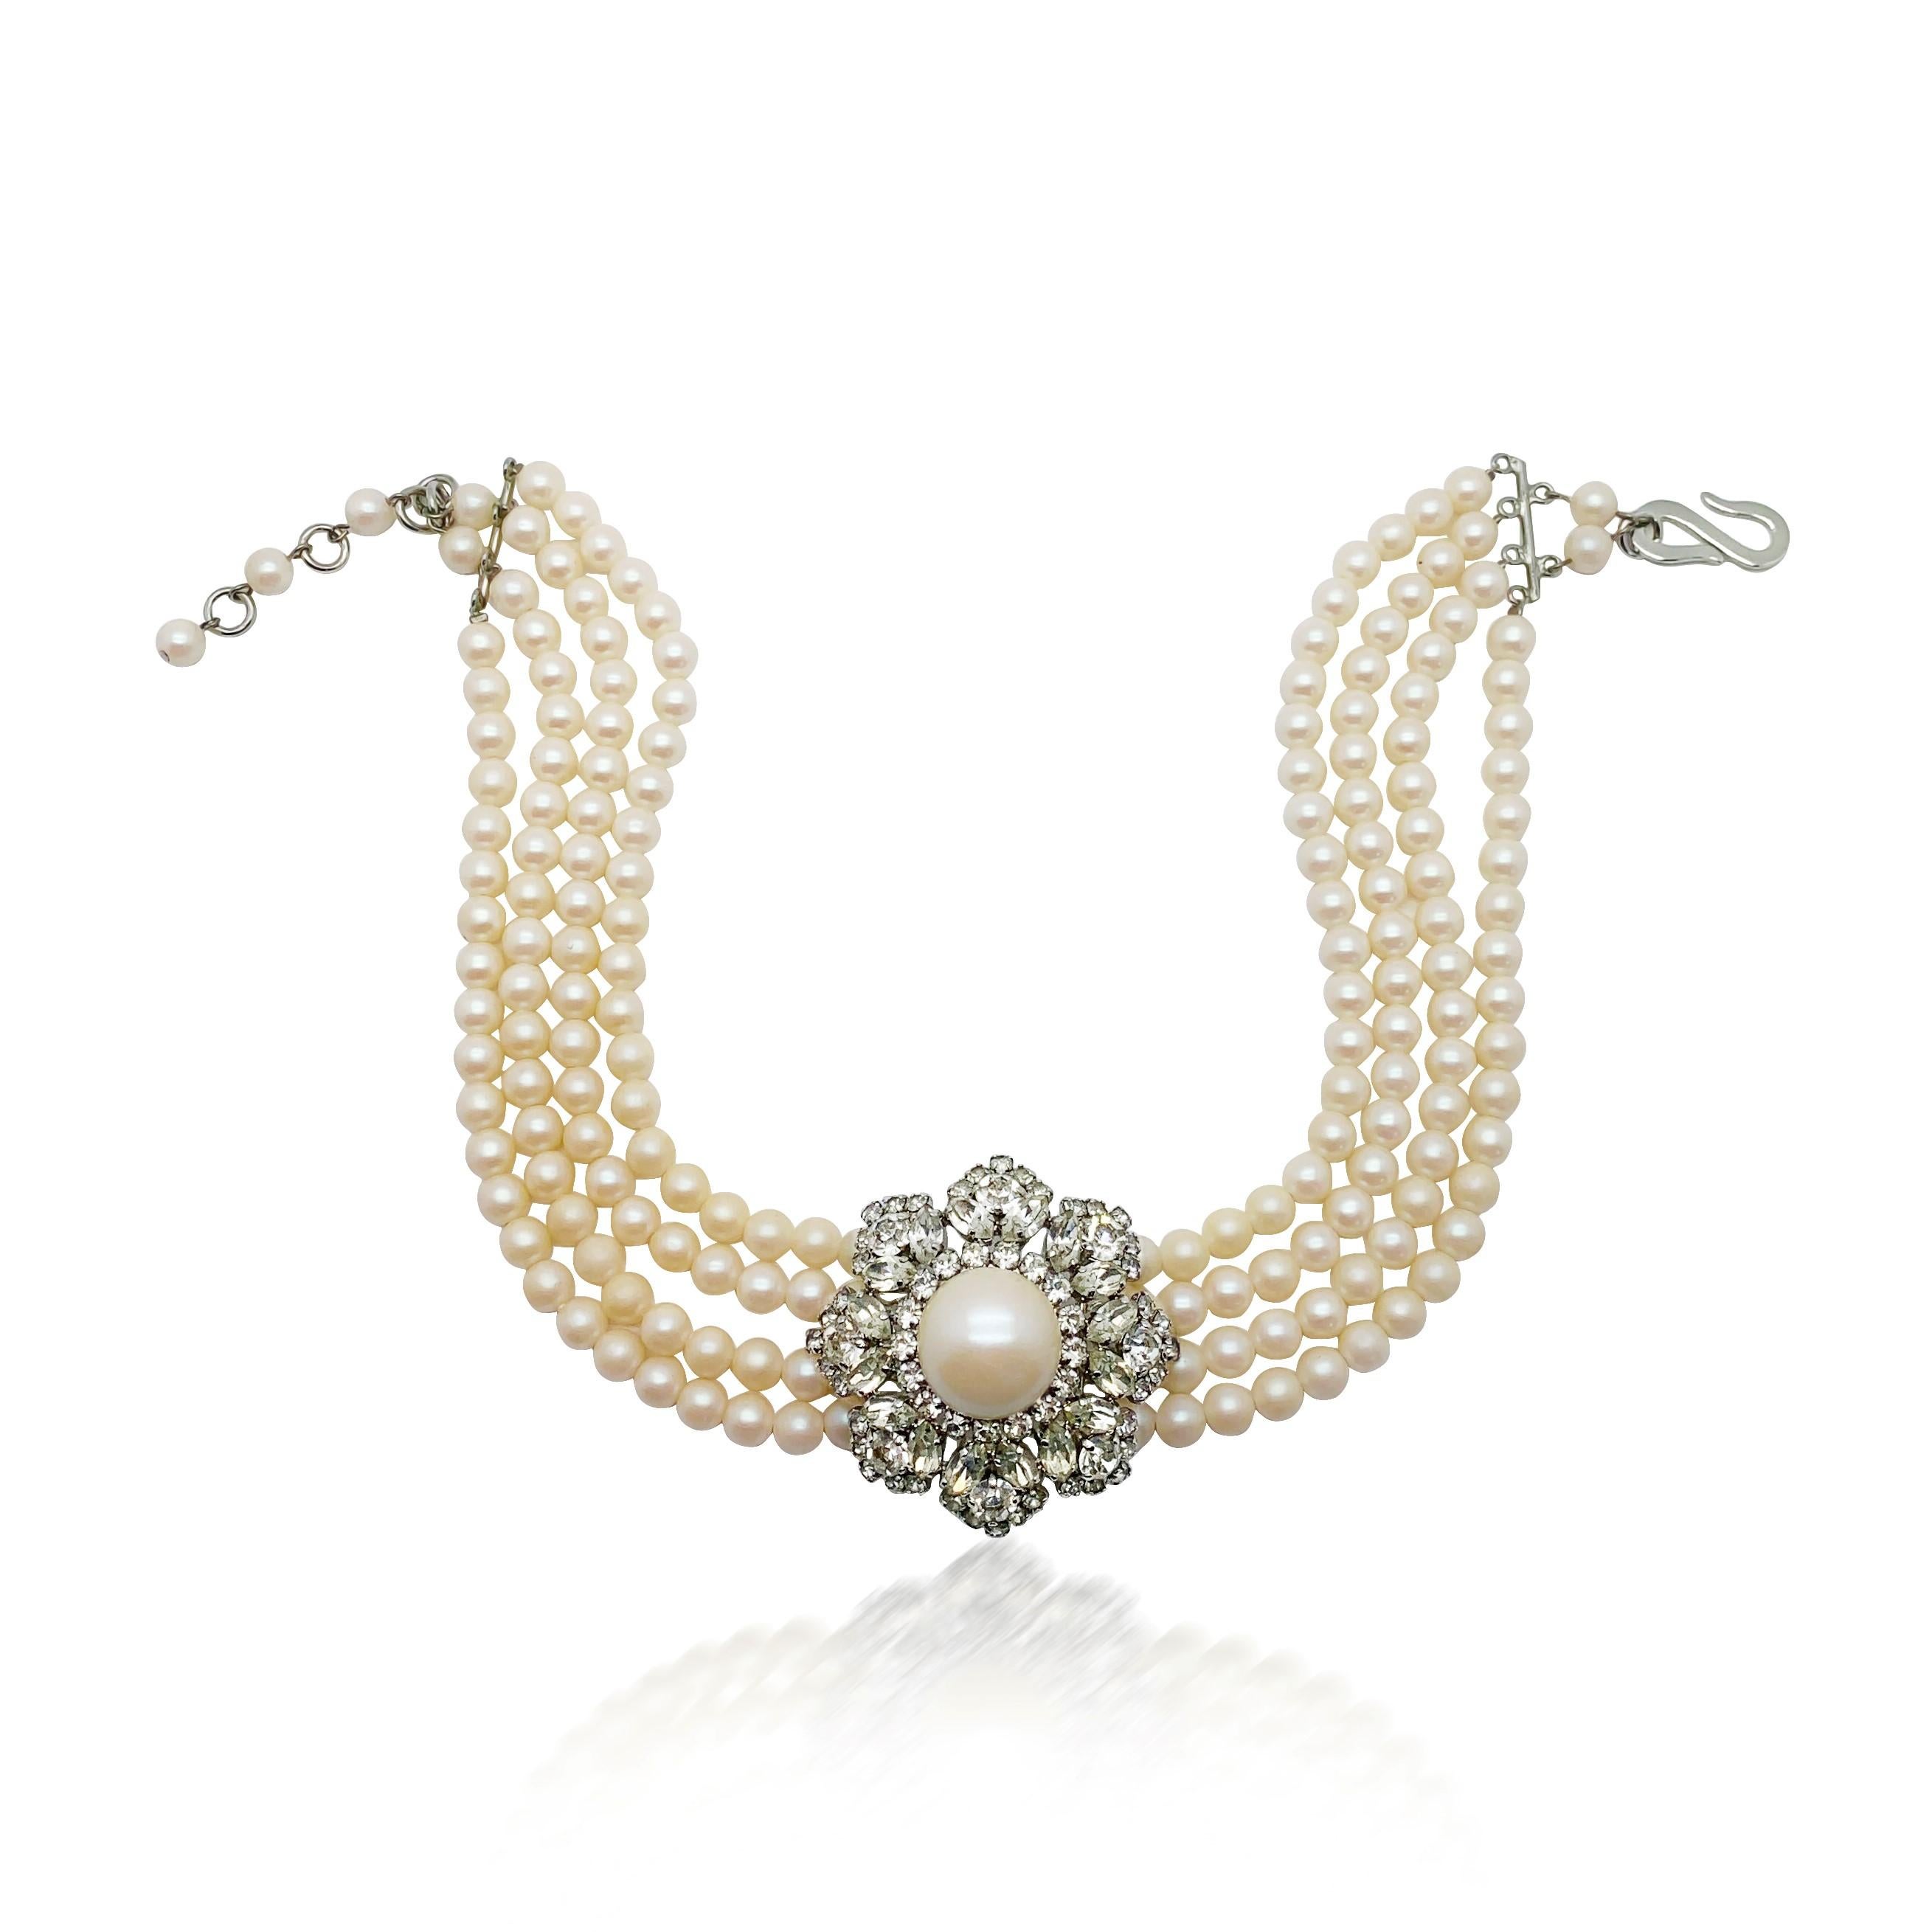 A sublime Vintage Dior Pearl Choker dating to the year 1970. Crafted in rhodium plated metal, claw set fancy cut crystal stones and simulated pearls. Featuring a stunning central stylised flower design intricately set with an array of sparkly fancy